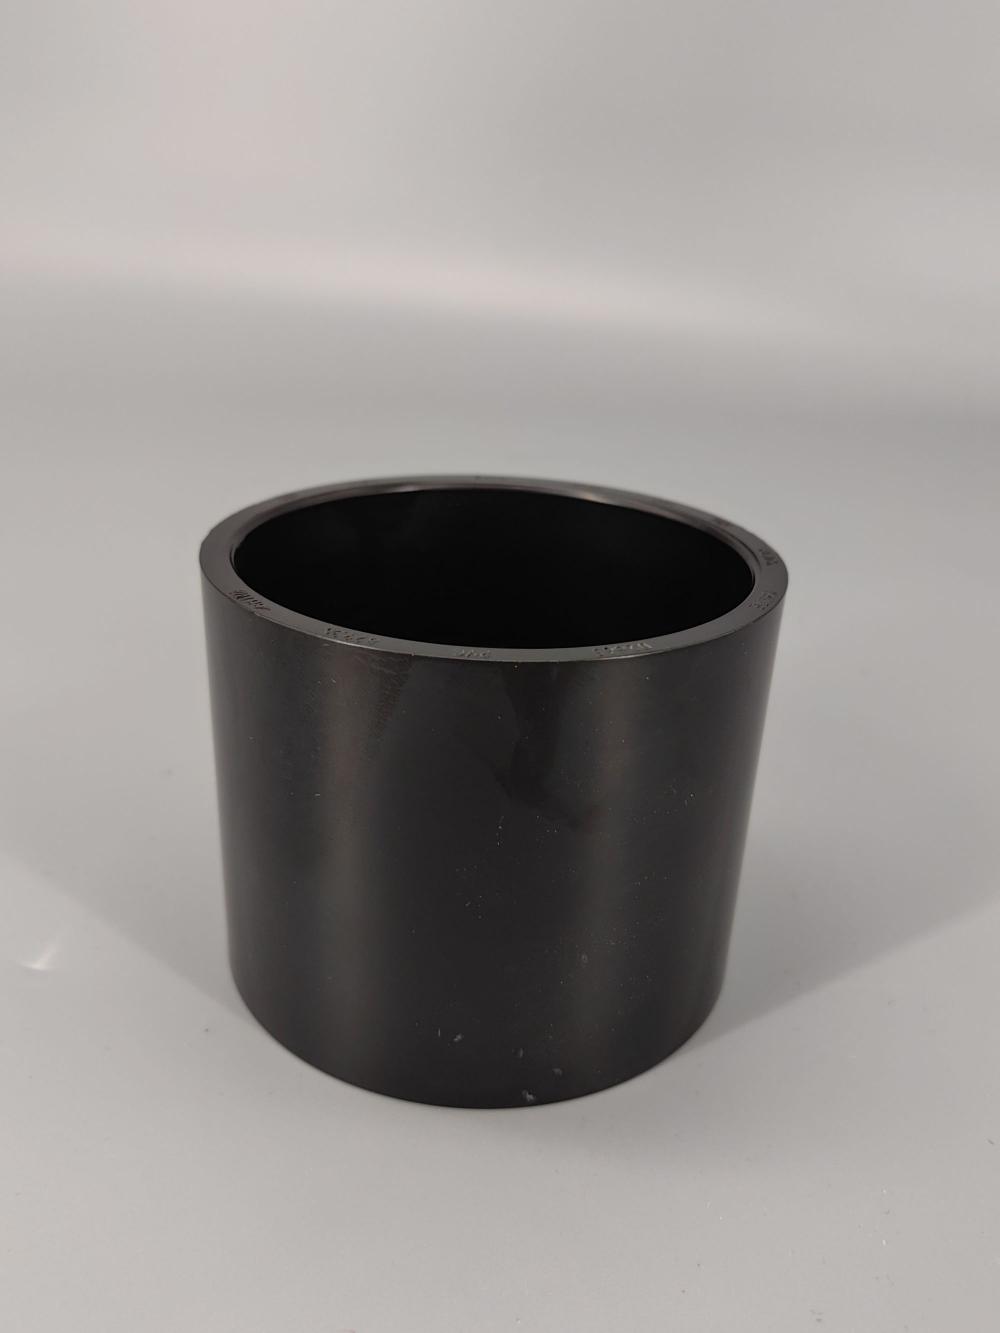 ABS pipe fittings 3 inch COUPLING